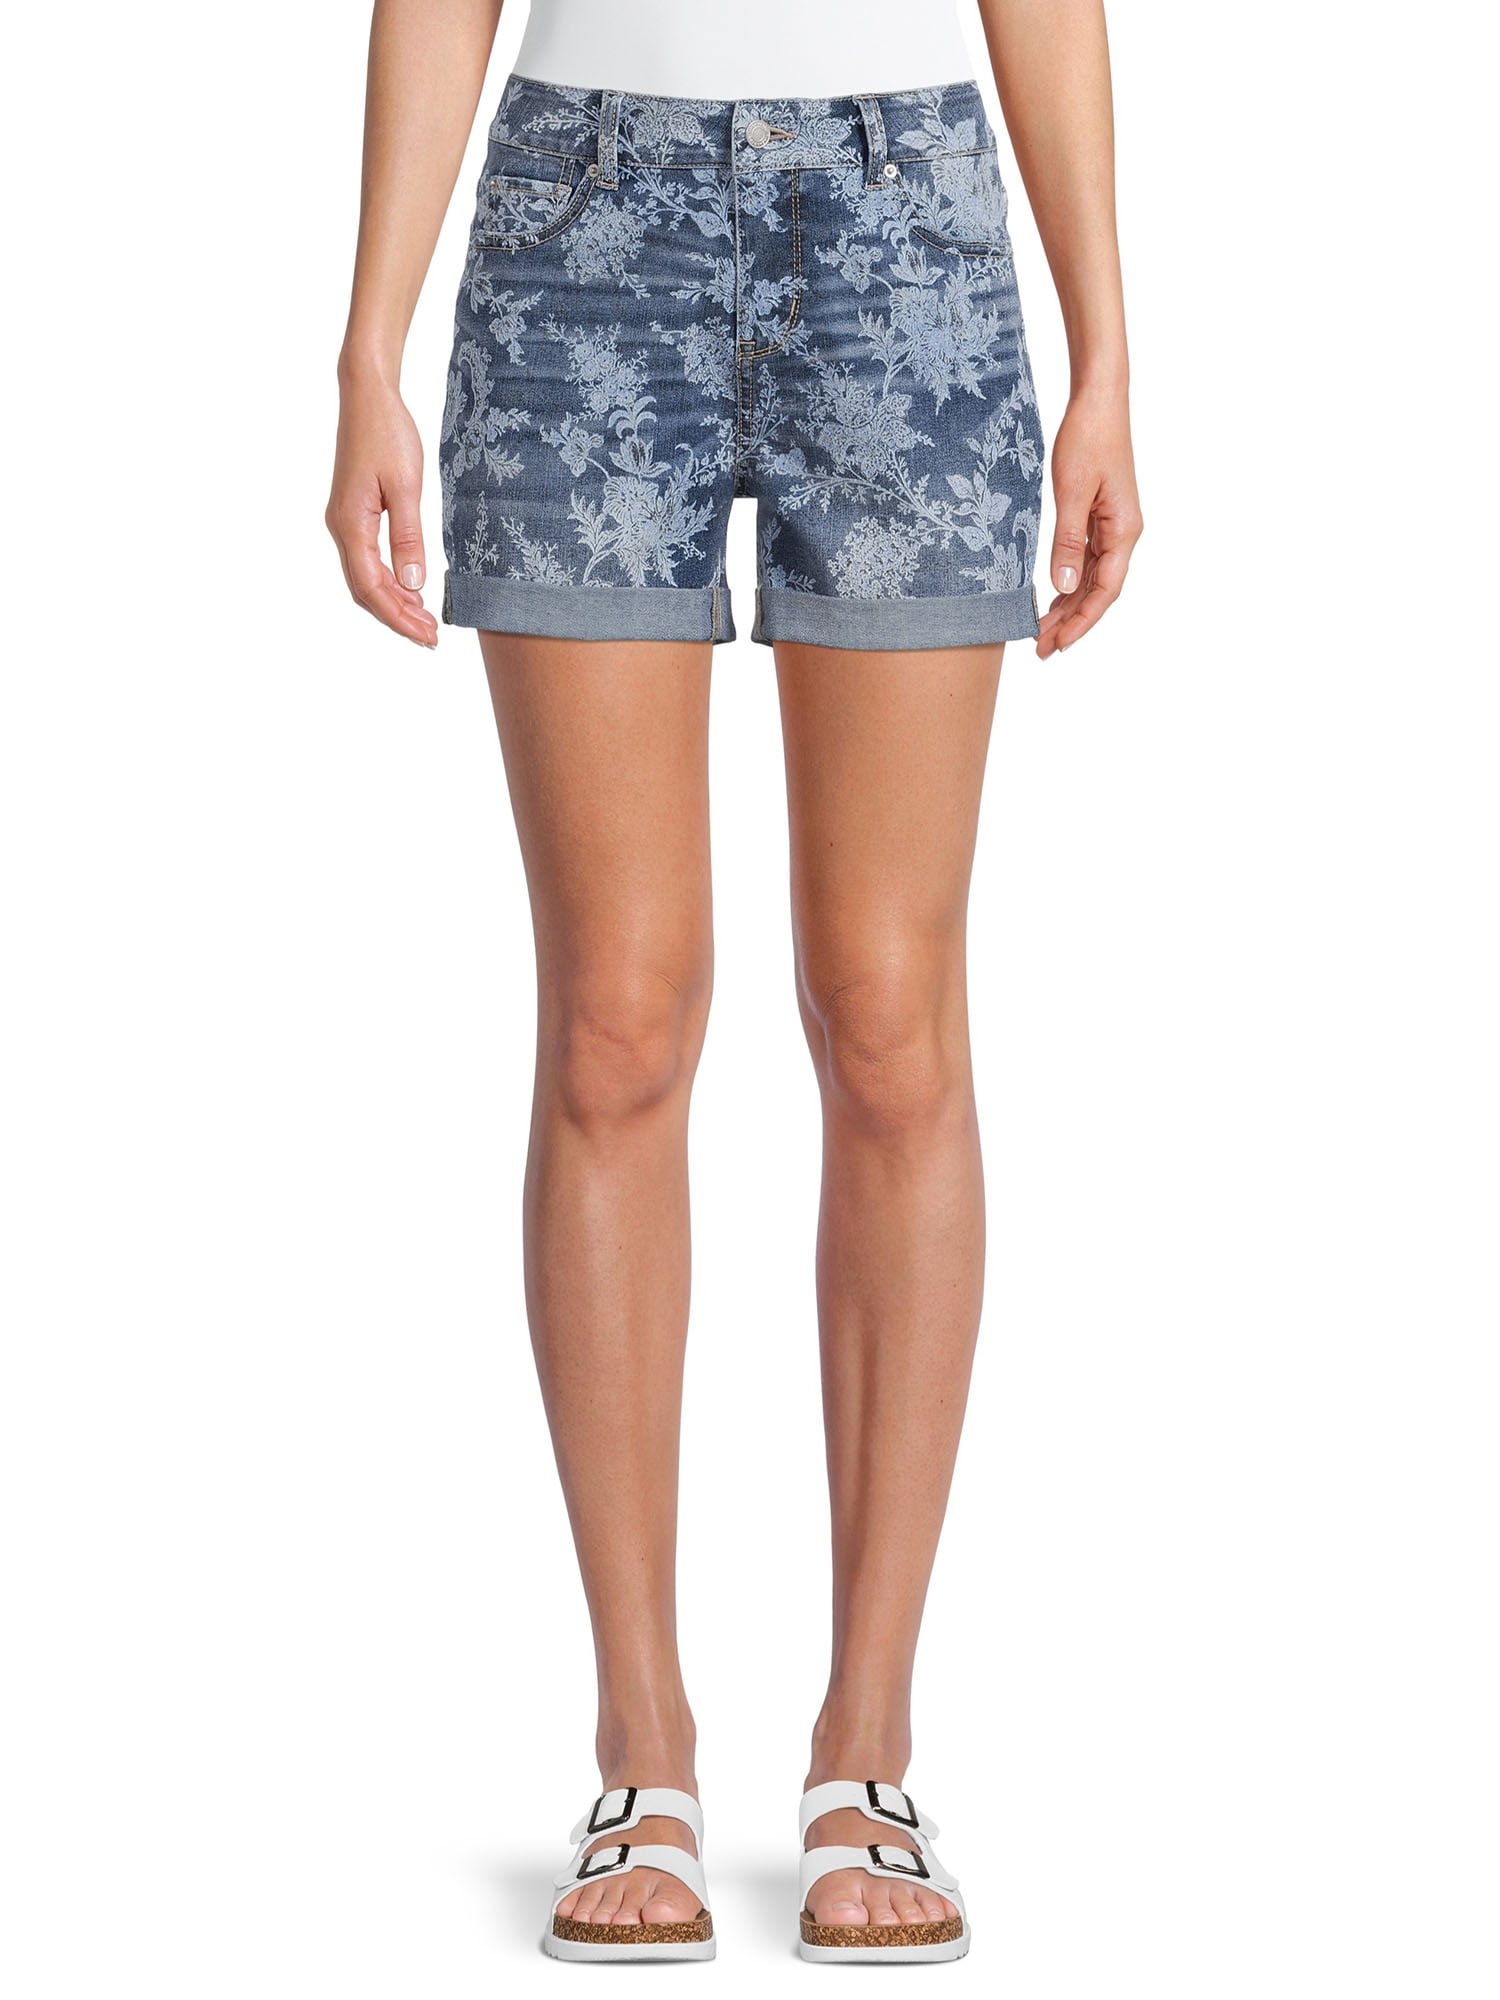 Time and Tru Women's Mid Rise Cuffed 4" Denim Shorts (Blue Floral, Size 2-20) $6.42 + Free Shipping w/ Walmart+ or on $35+